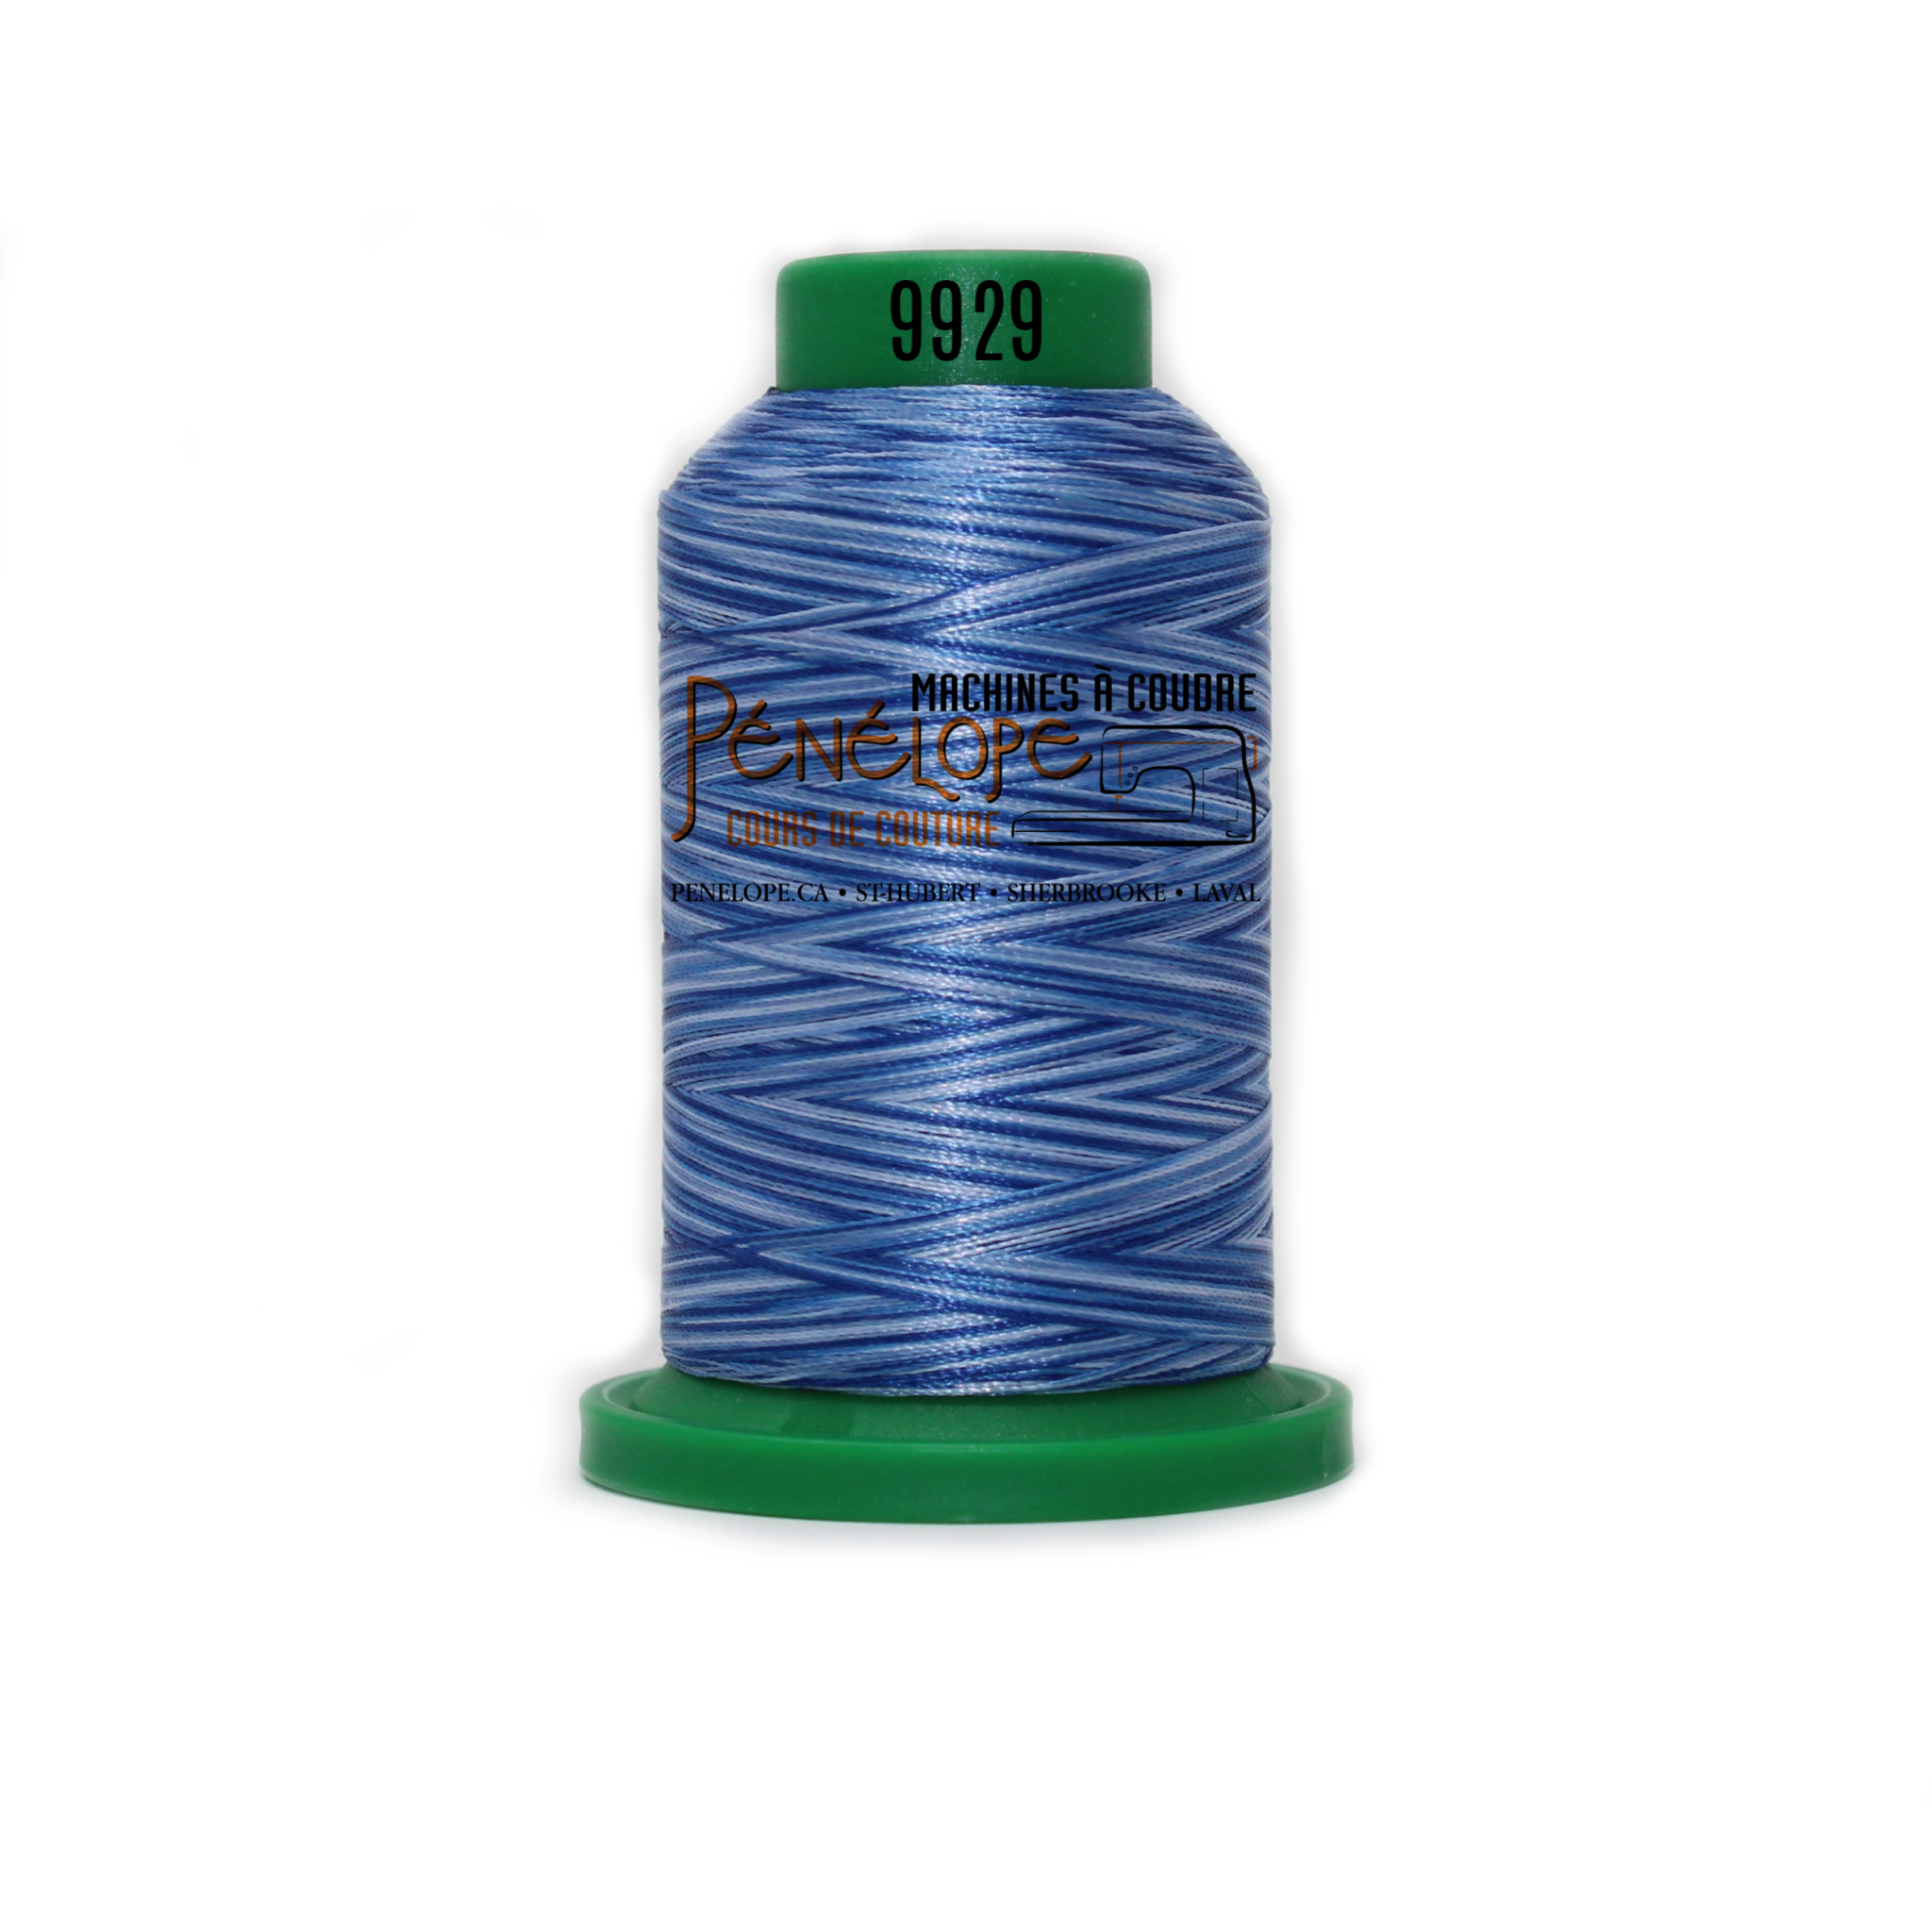 Isacord Isacord multicoloured sewing and embroidery thread 9929 1000m